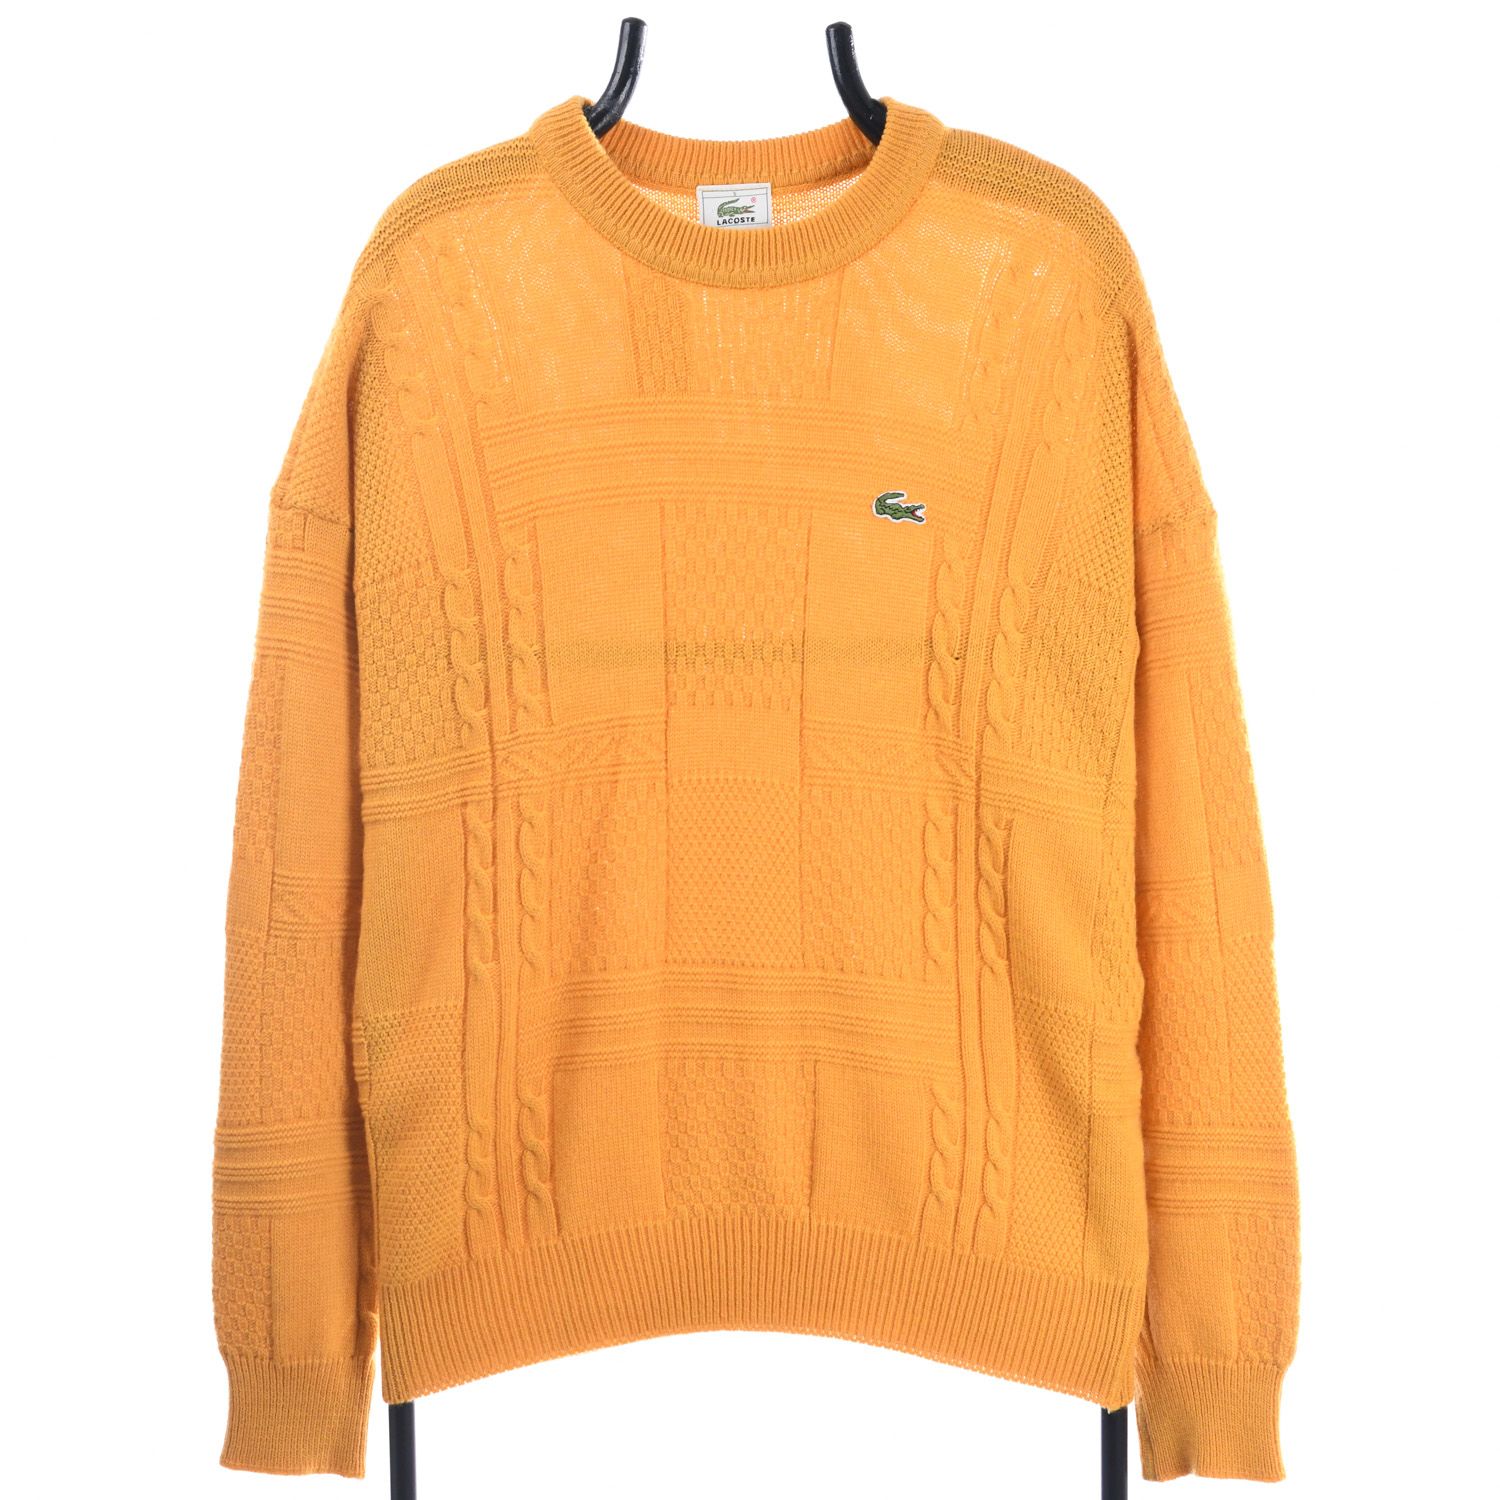 Lacoste Cable Knit Jumper